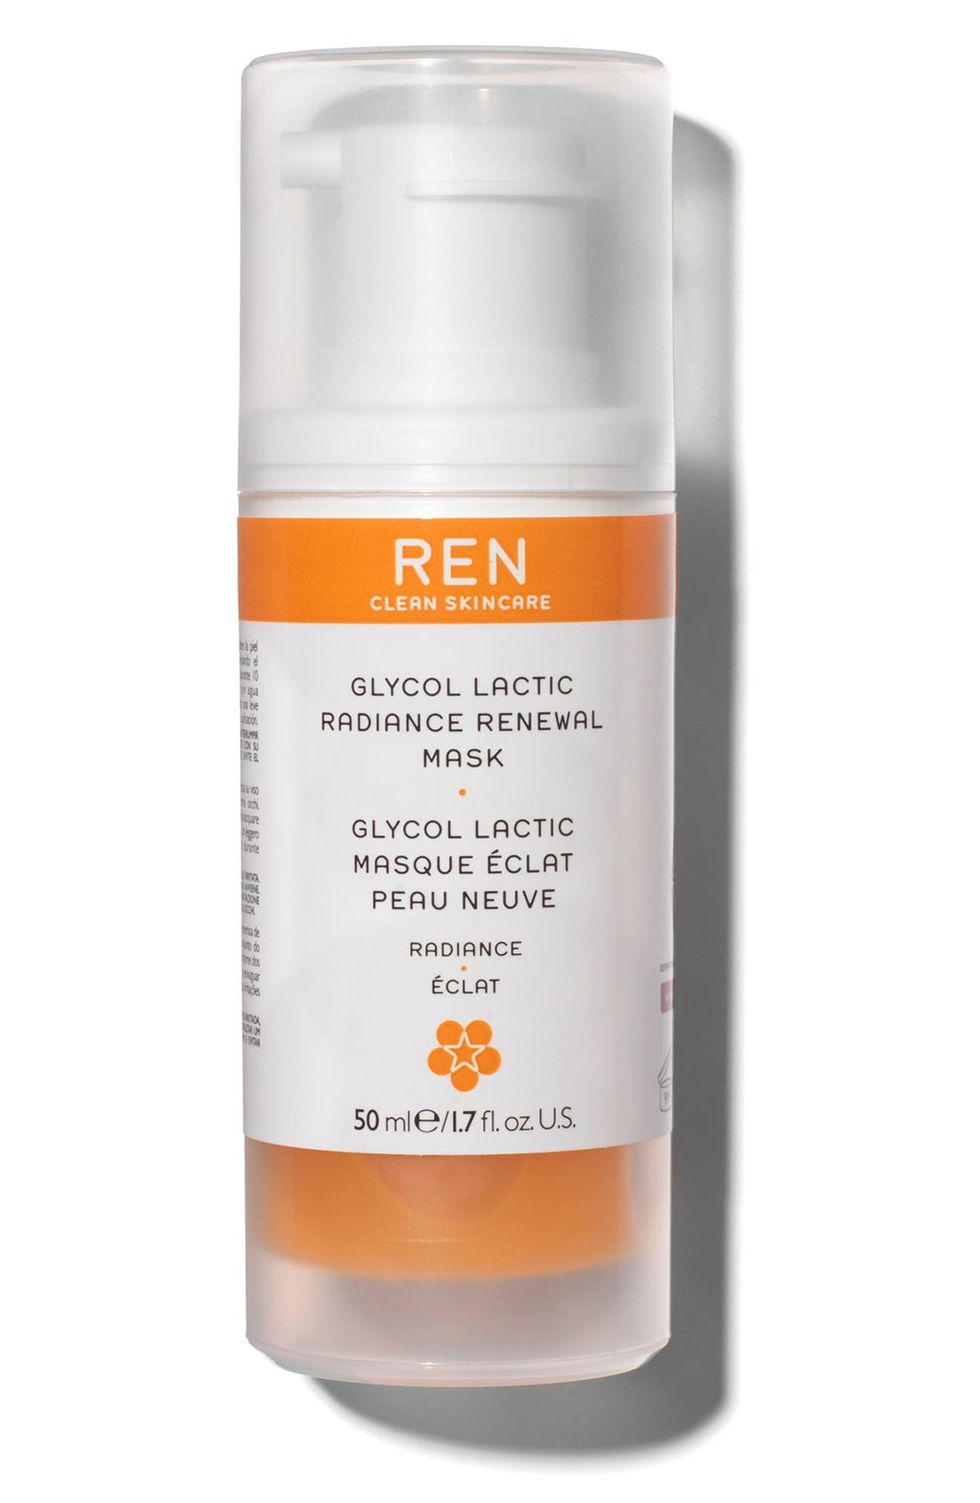 REN Clean Skincare Glycol Lactic Radiance Renewal Mask, Size 1.7 Oz at Nordstrom